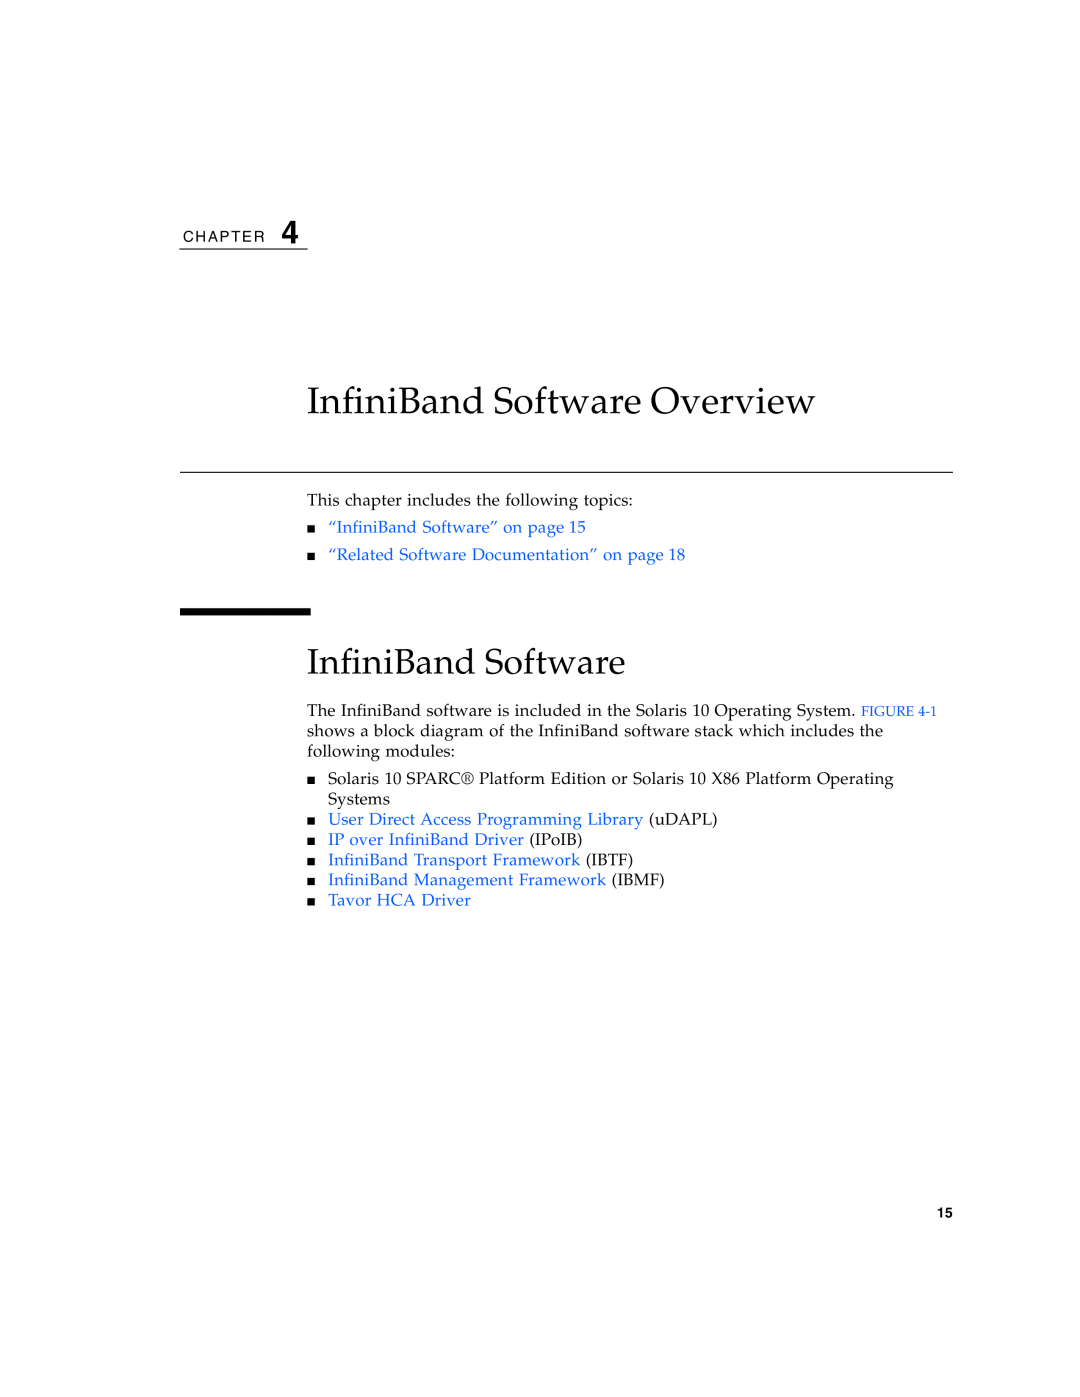 Sun Microsystems PCI manual InfiniBand Software Overview 